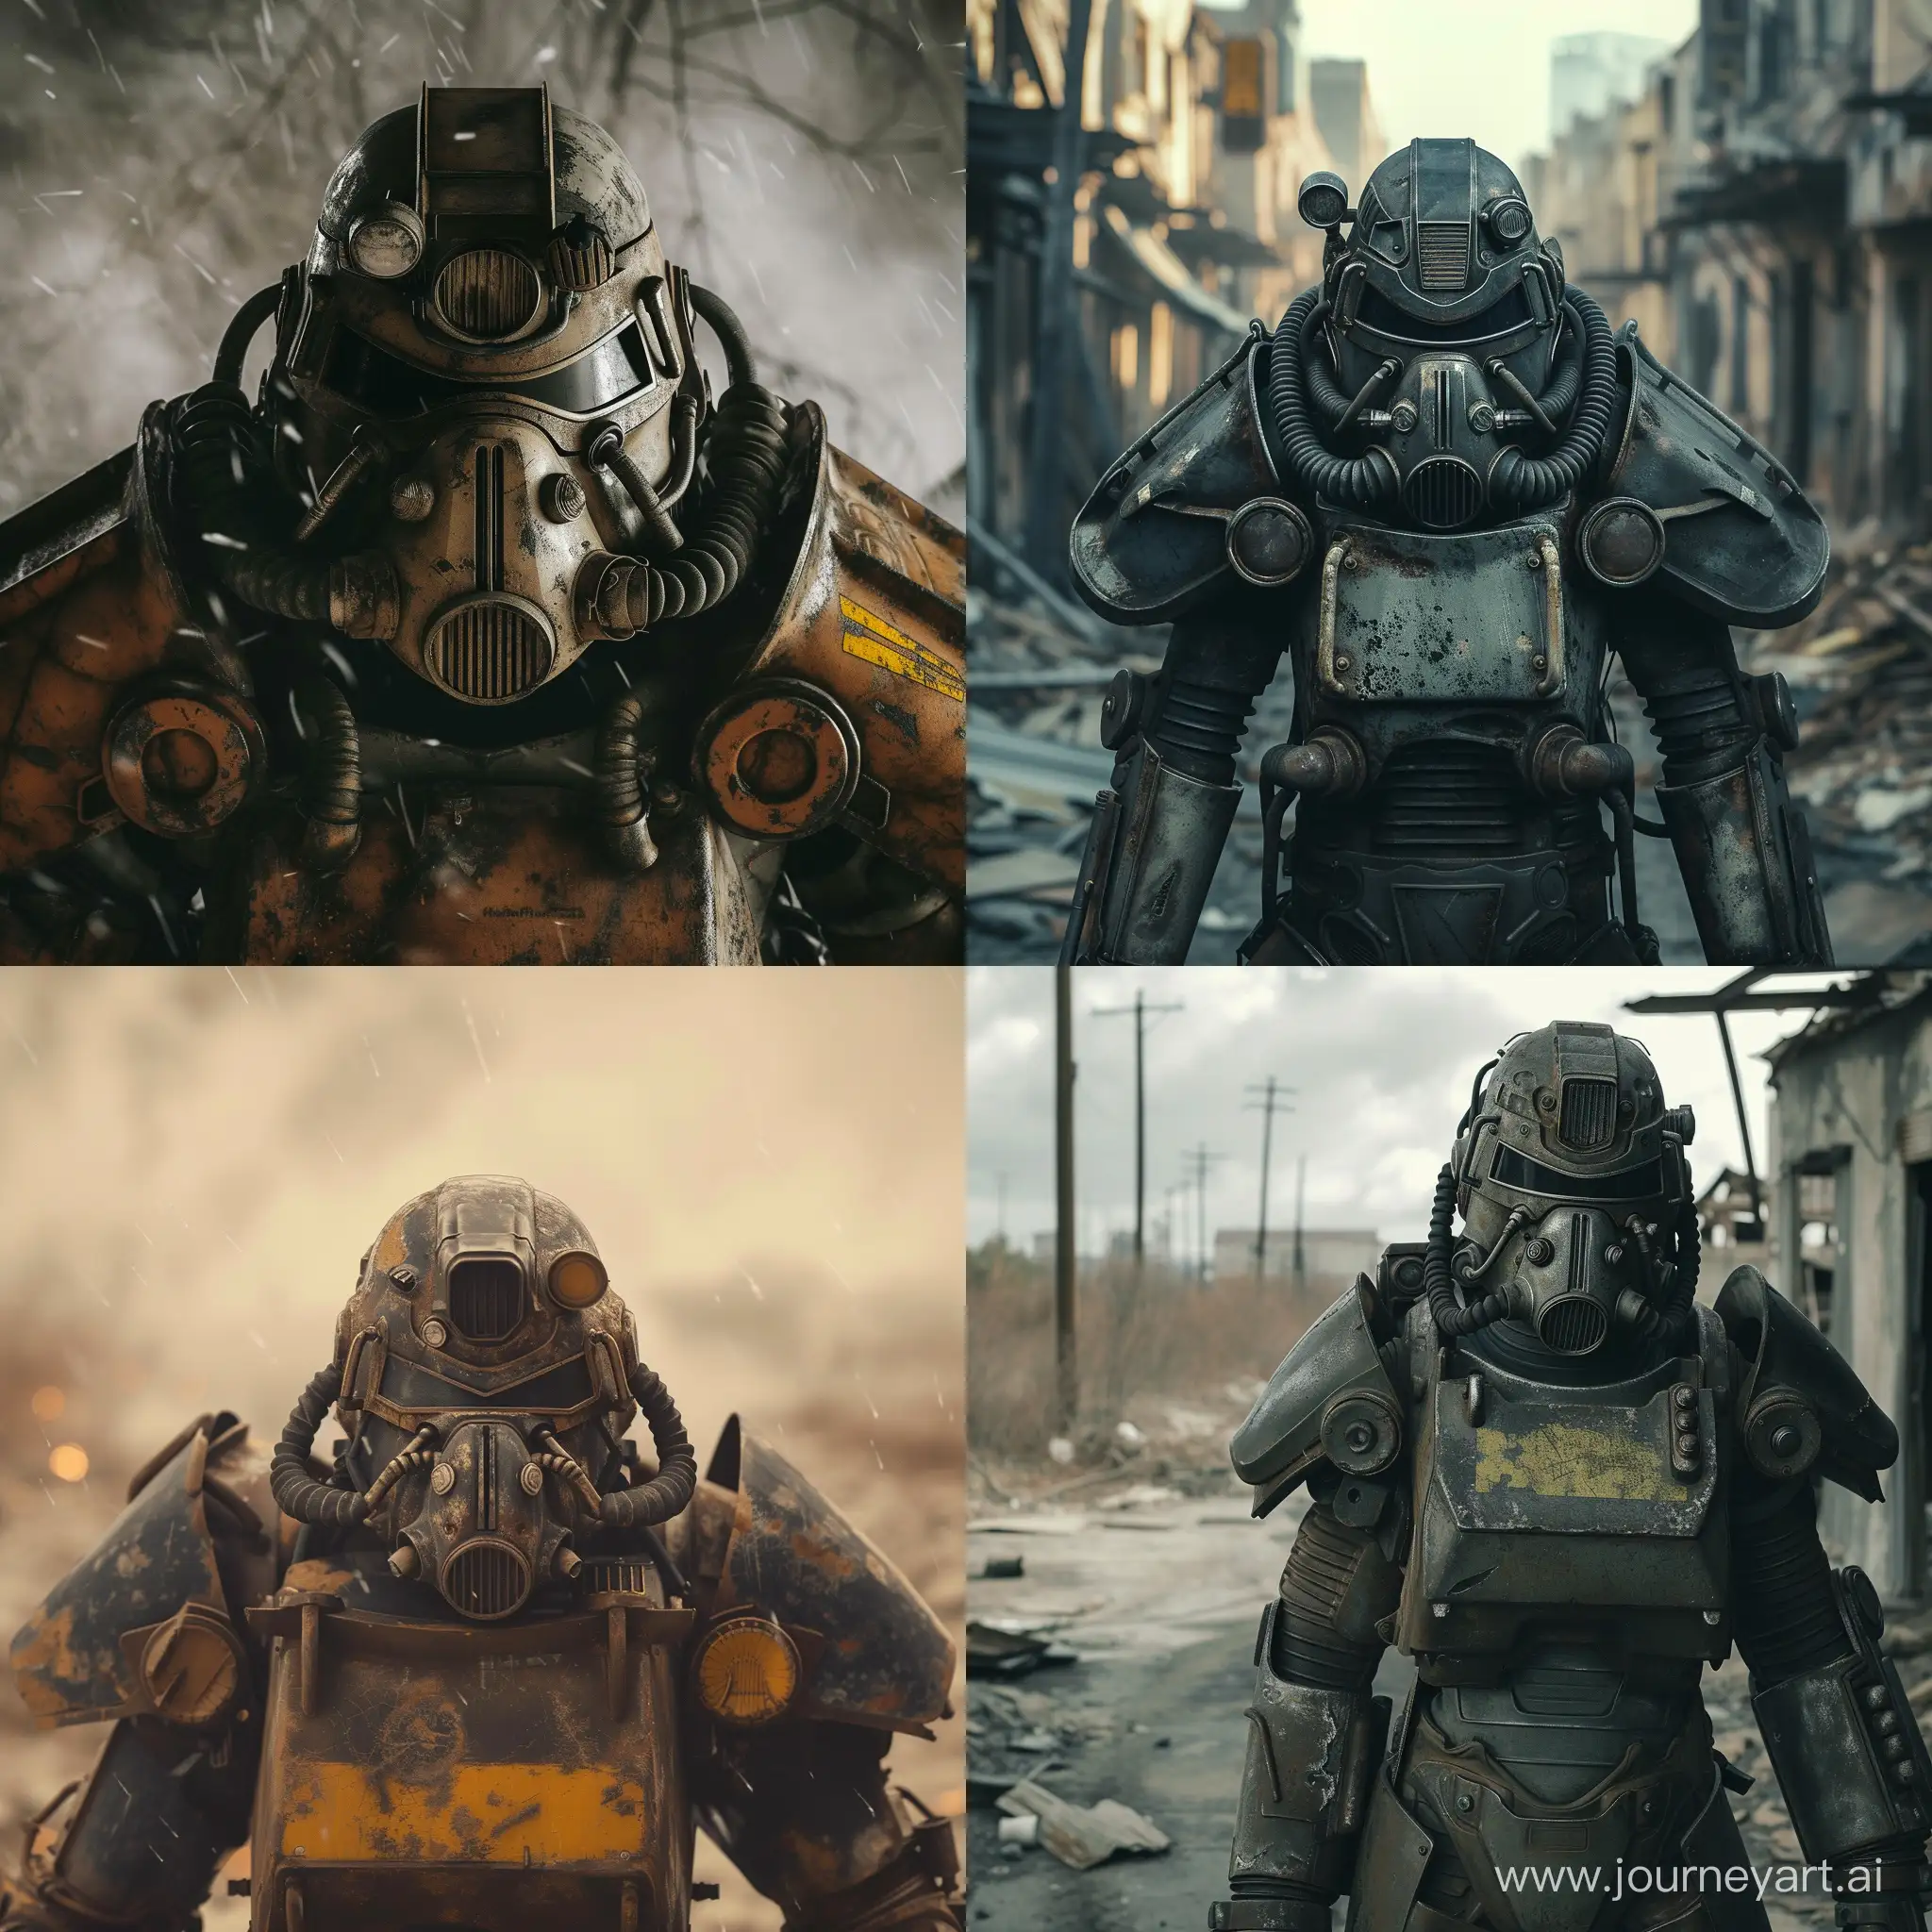 PostApocalyptic-Cinematic-Masterpiece-with-Fallout-Aesthetic